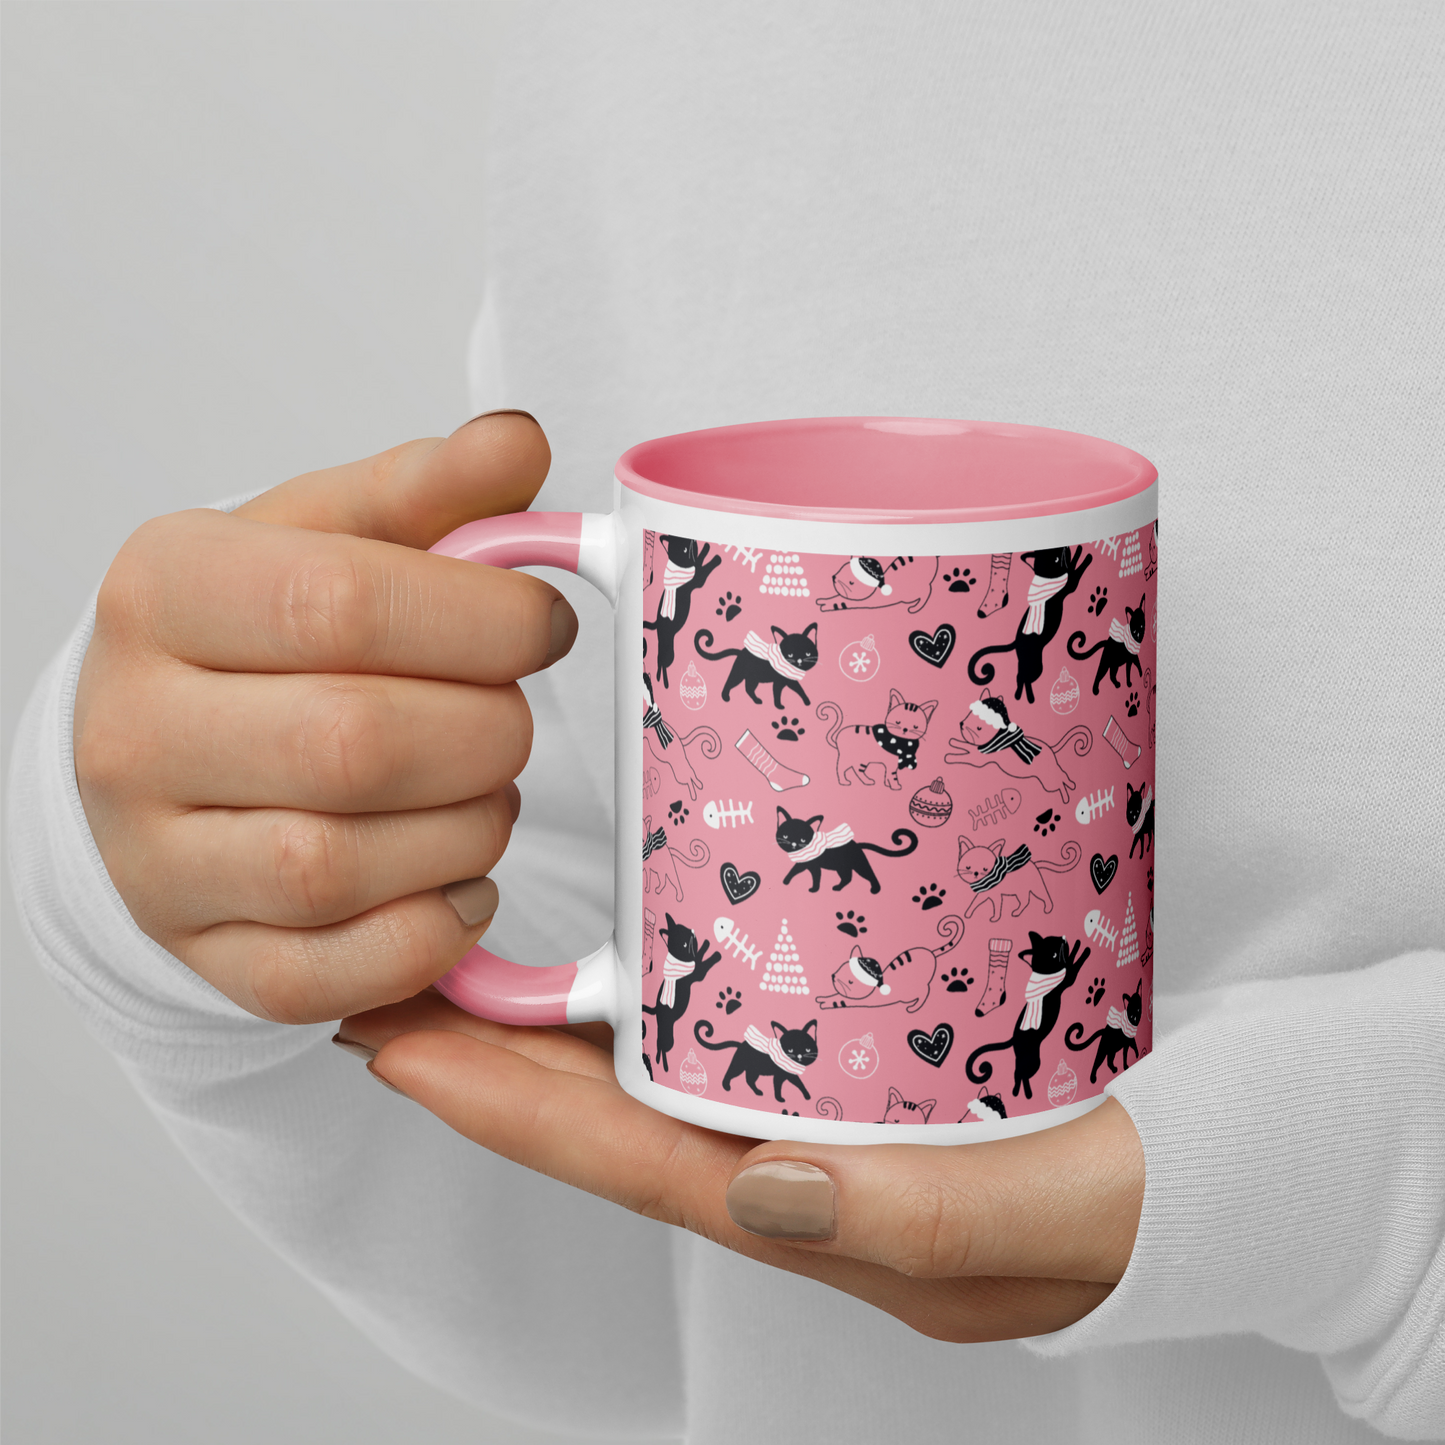 Winter Christmas Cat | Seamless Patterns | White Ceramic Mug with Color Inside - #2